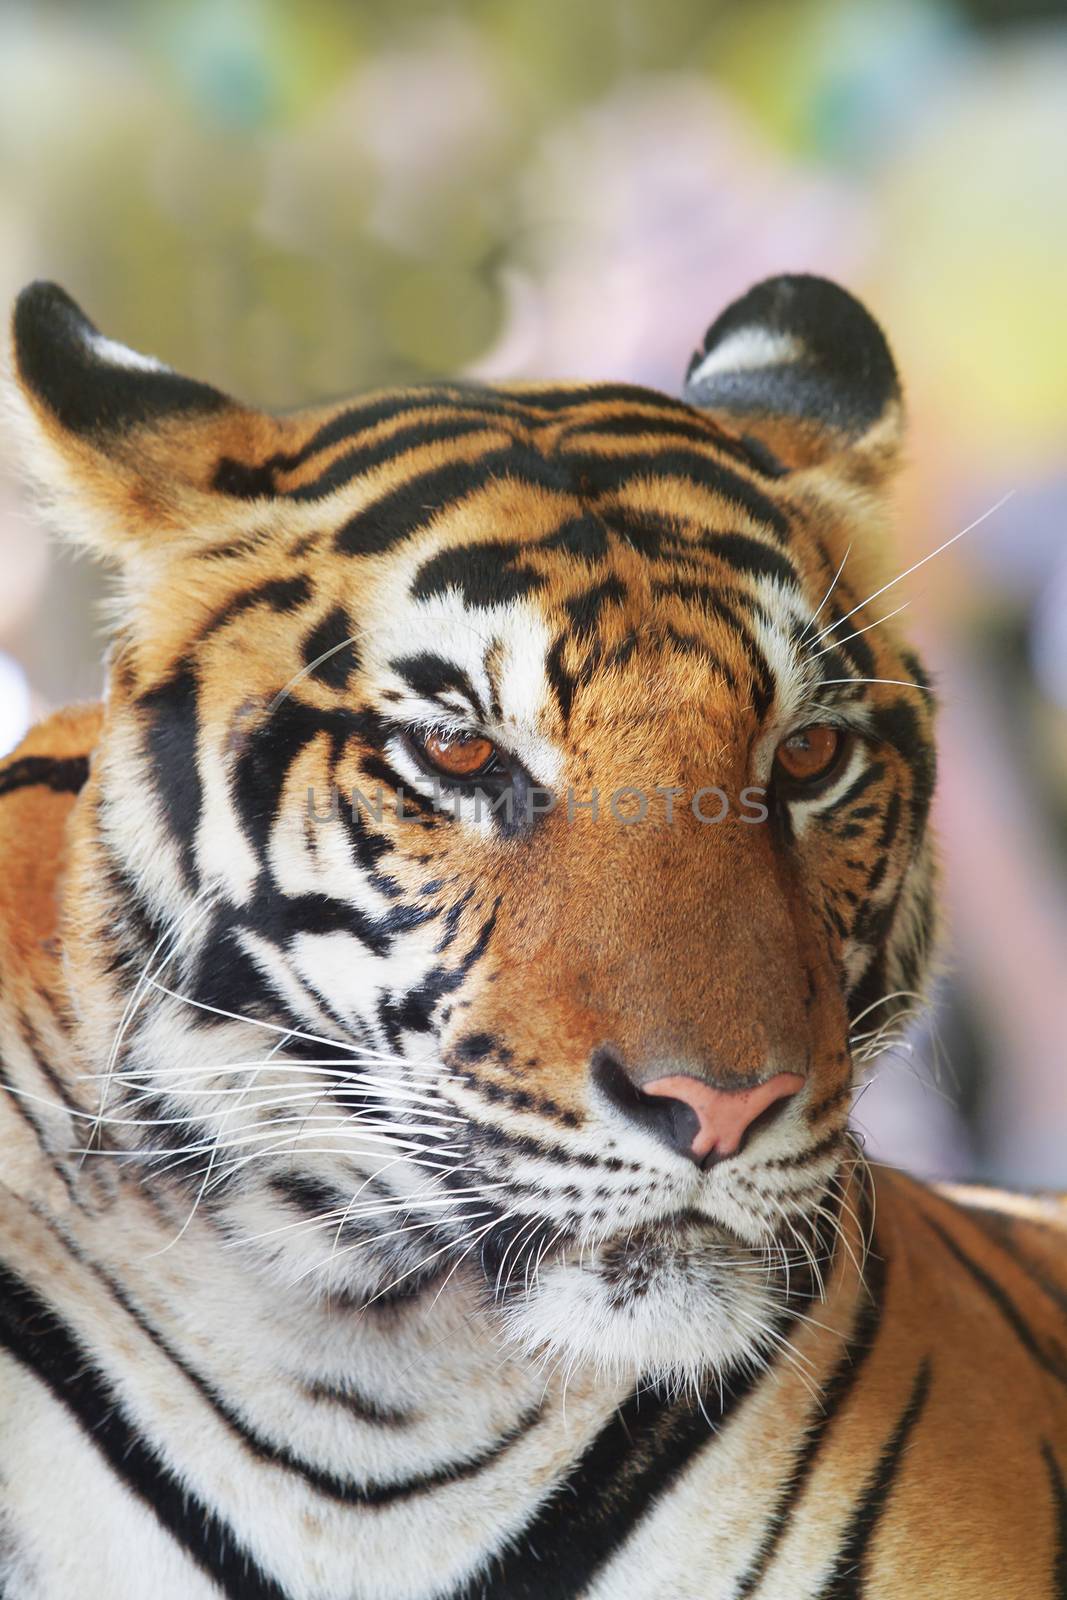 close up face of indochinese tiger use for animals and wild life theme